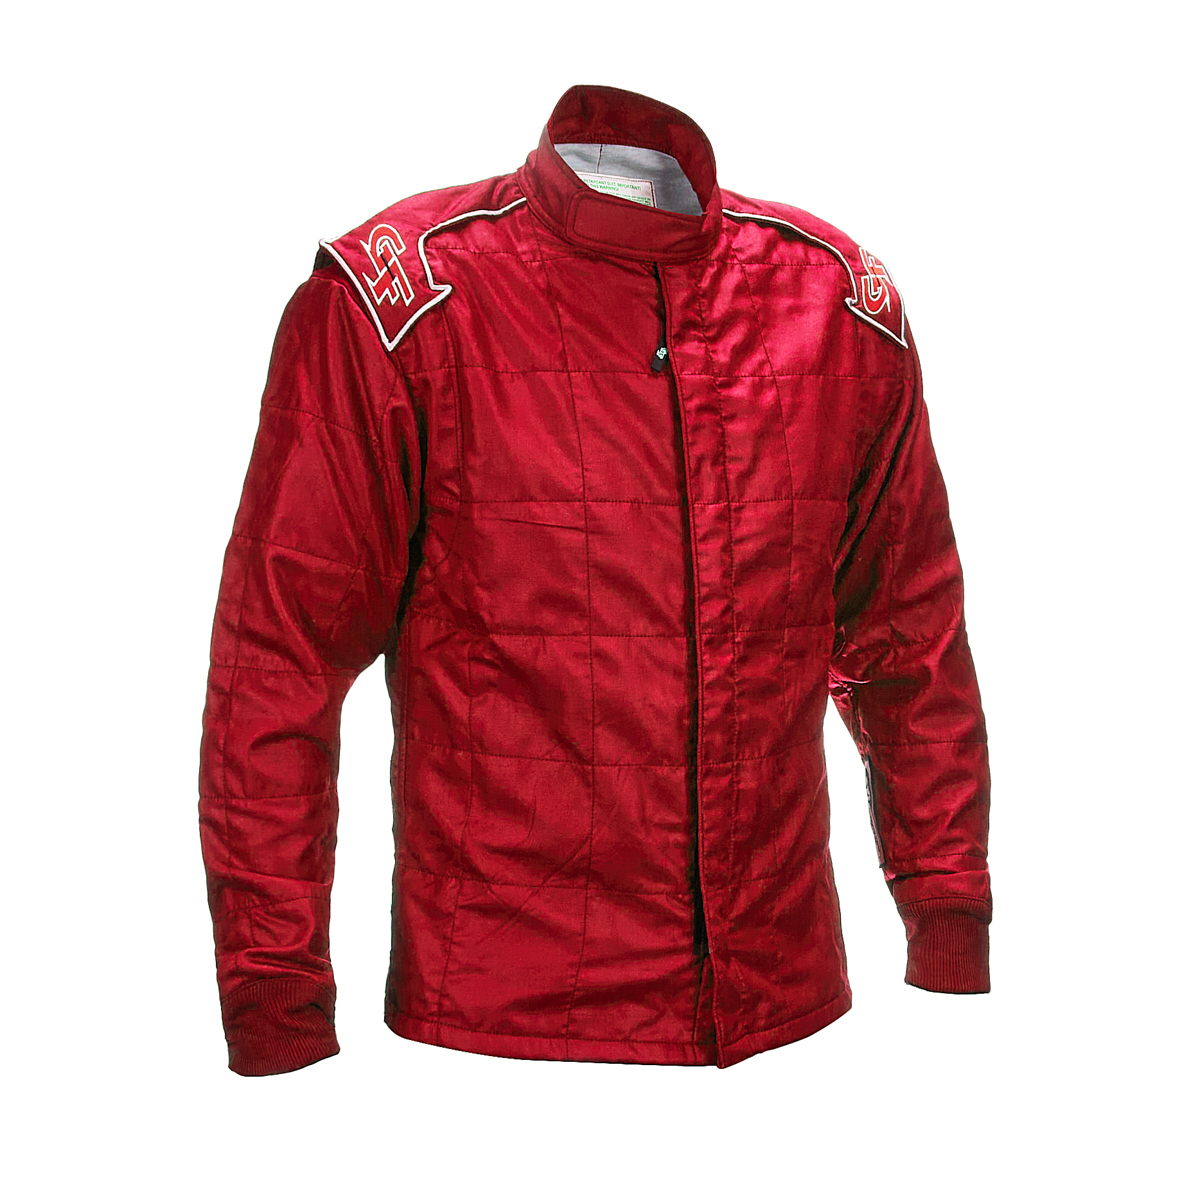 G-Force Racing Gear 35452XLGRD Driving Jacket, G-Limit, SFI 3.2A/5, Multiple Layer, Fire Retardant Cotton / Nomex, Red, X-Large, Each